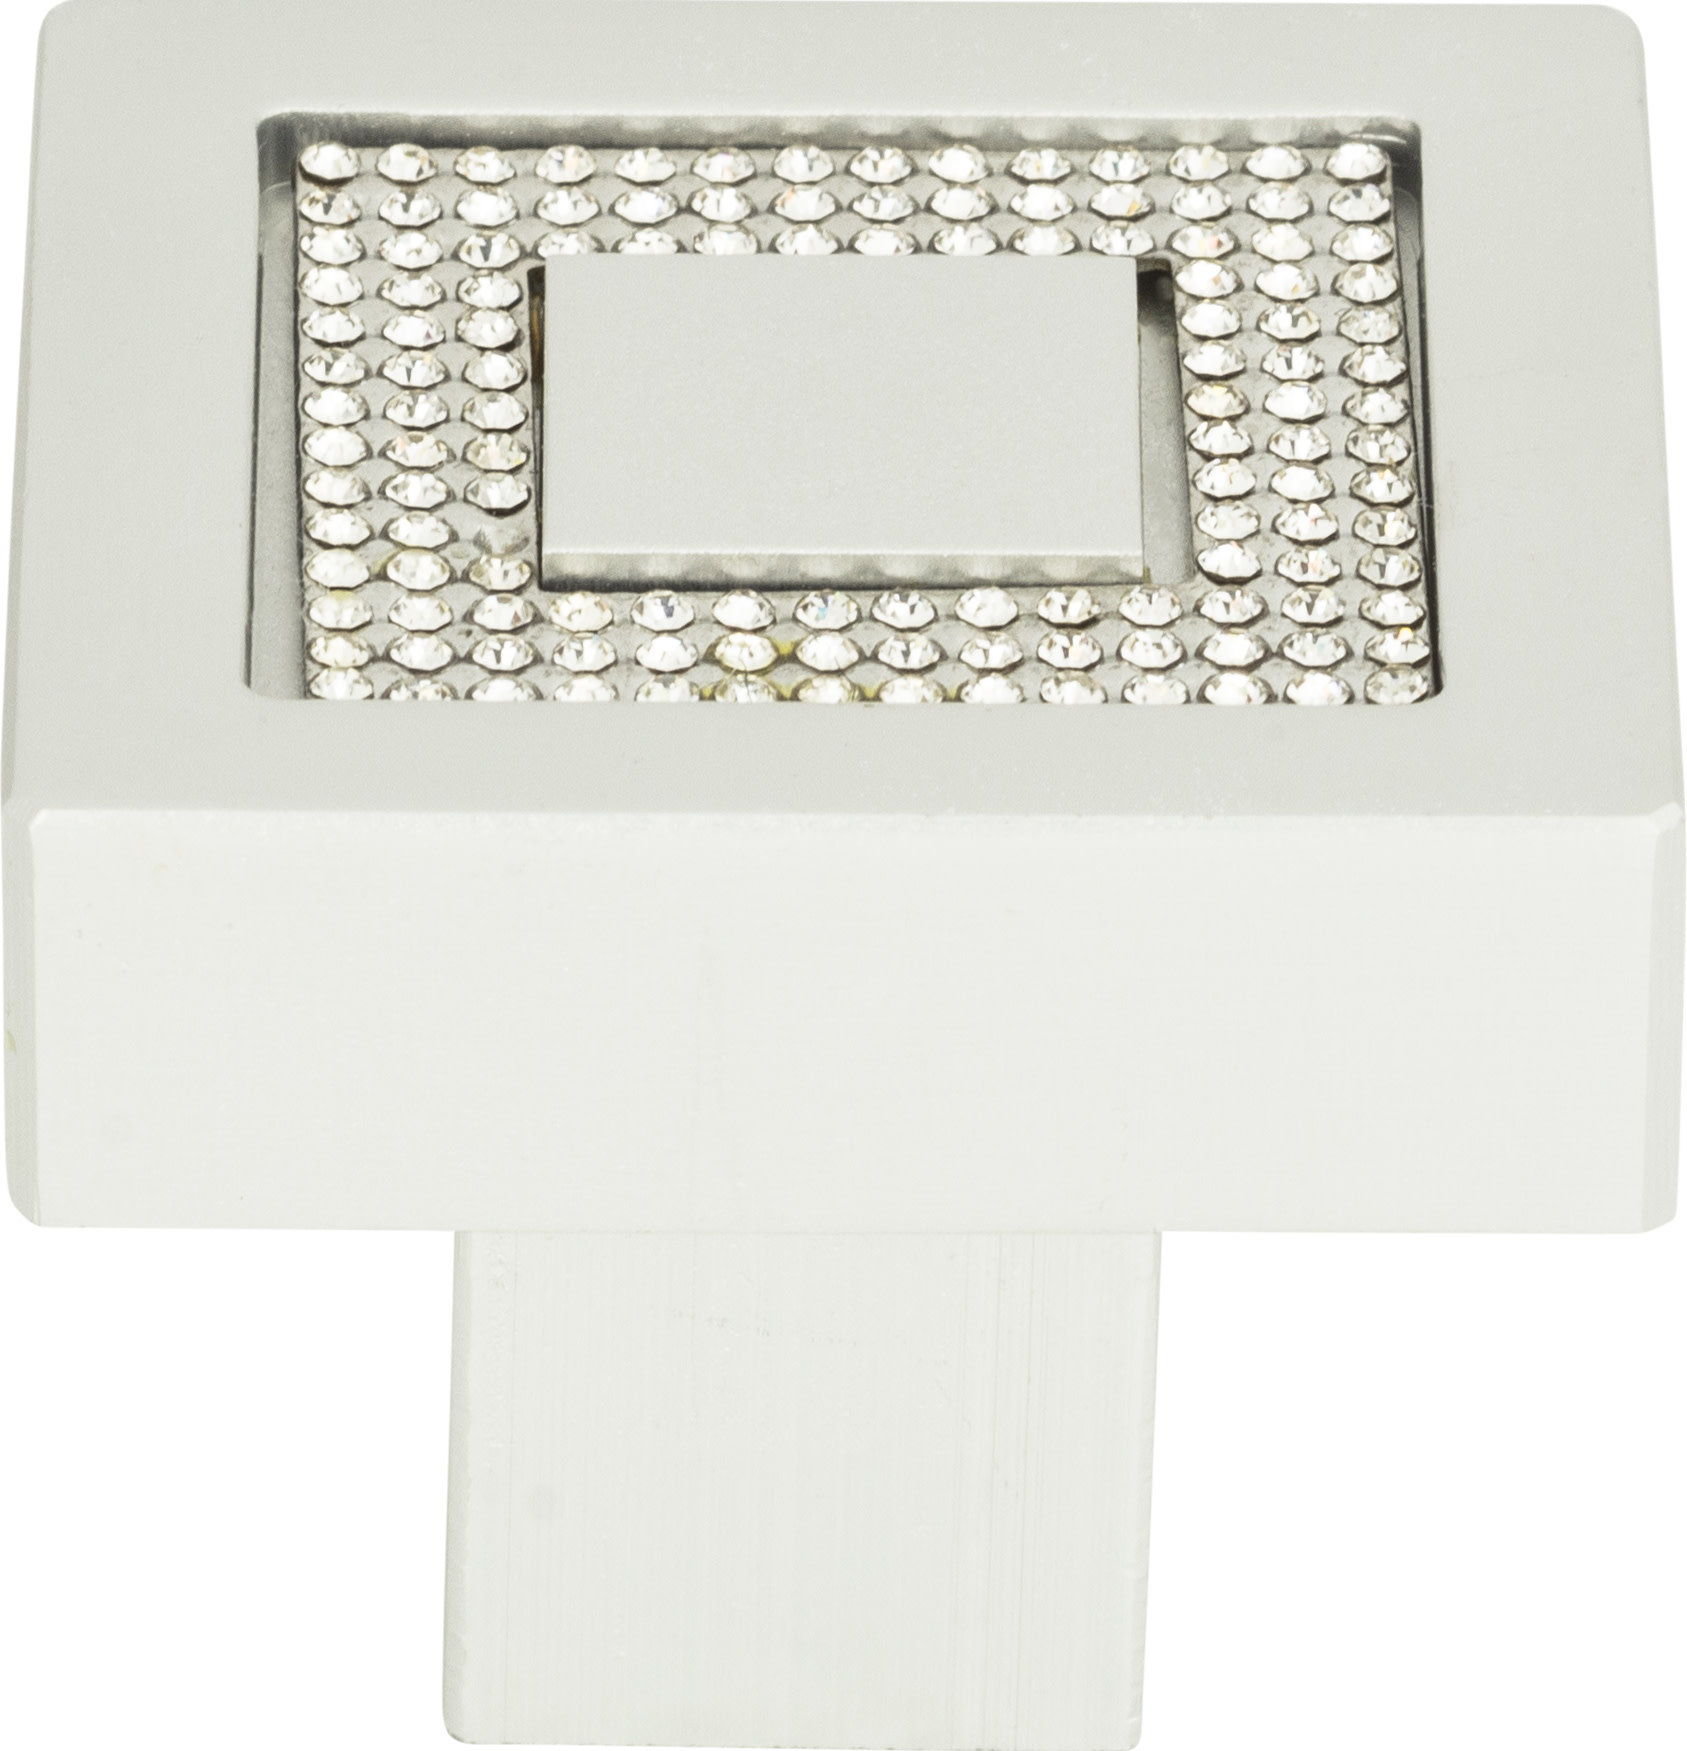 Crystal Pave 1.4 in. Square Knob - 3192-MC (Matte Chrome) - image 1 of 5